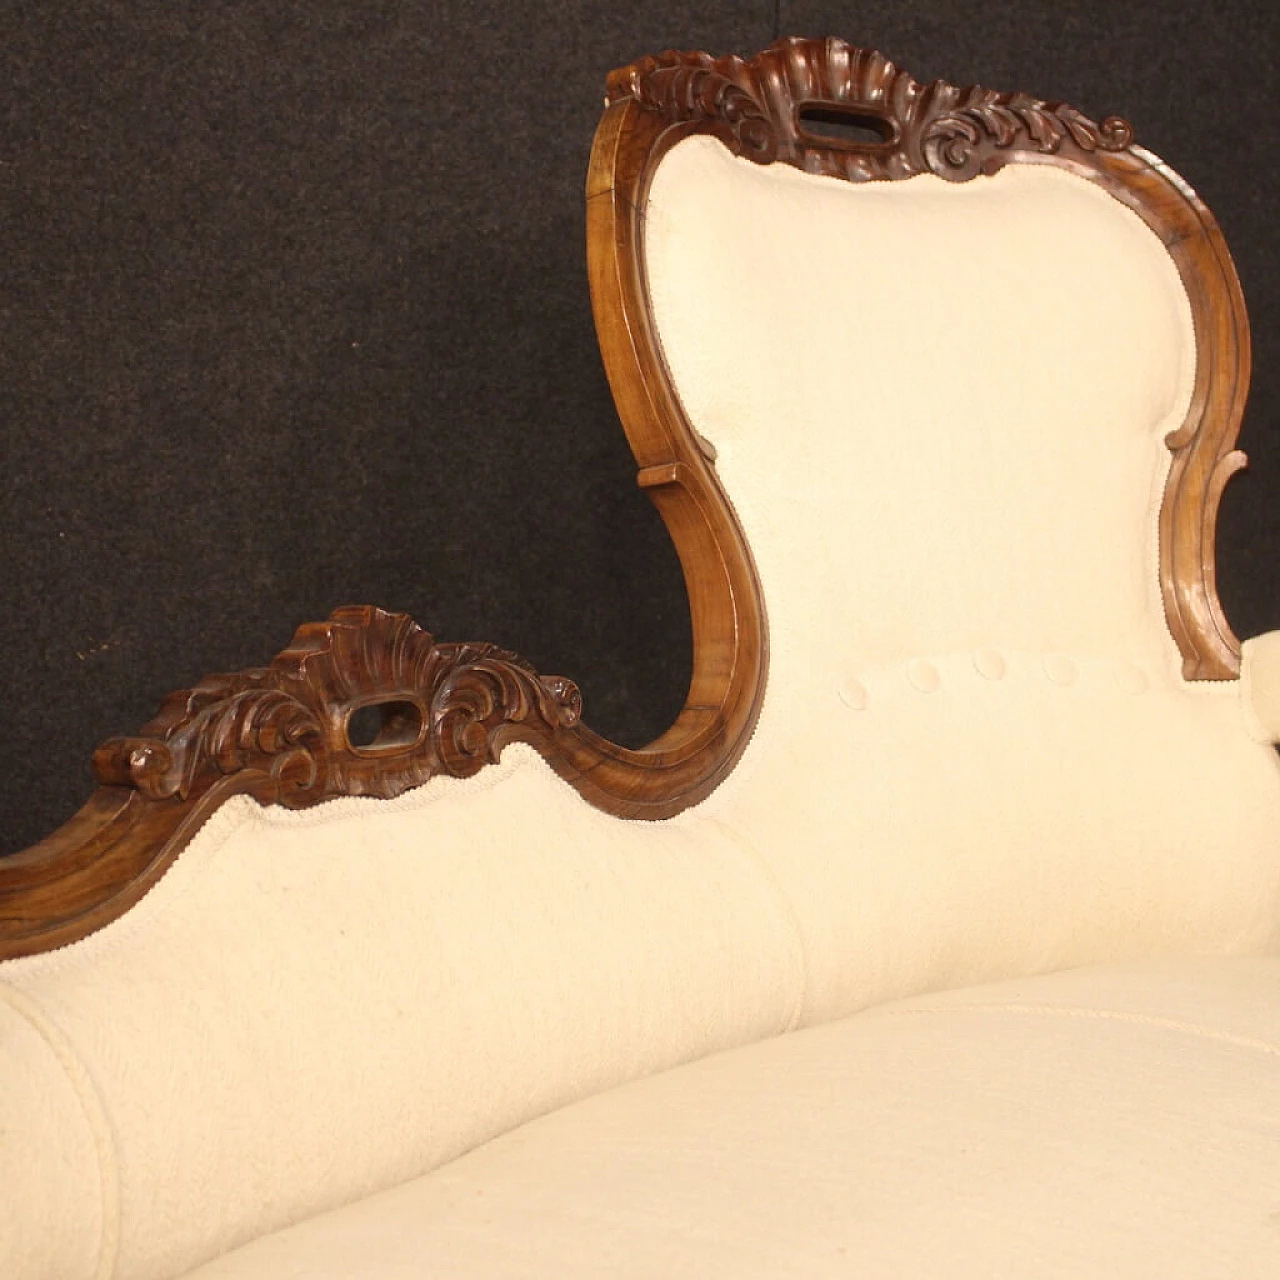 Walnut and fabric sofa with casters, late 19th century 1090595